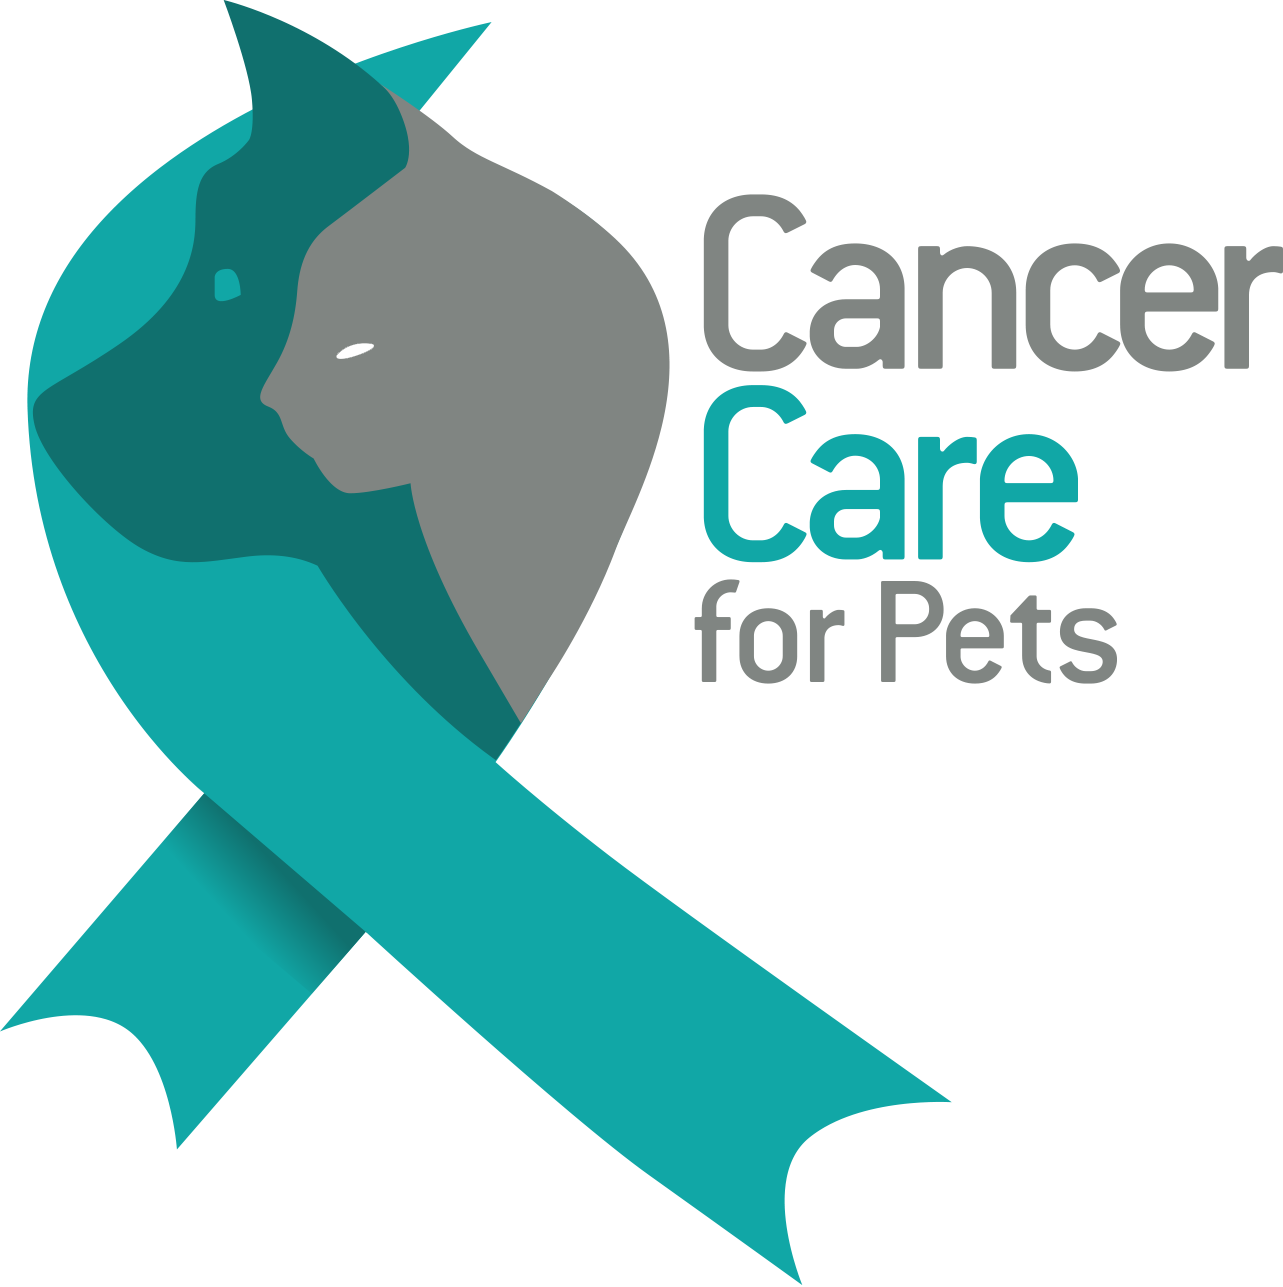 Cancer Care For Pets